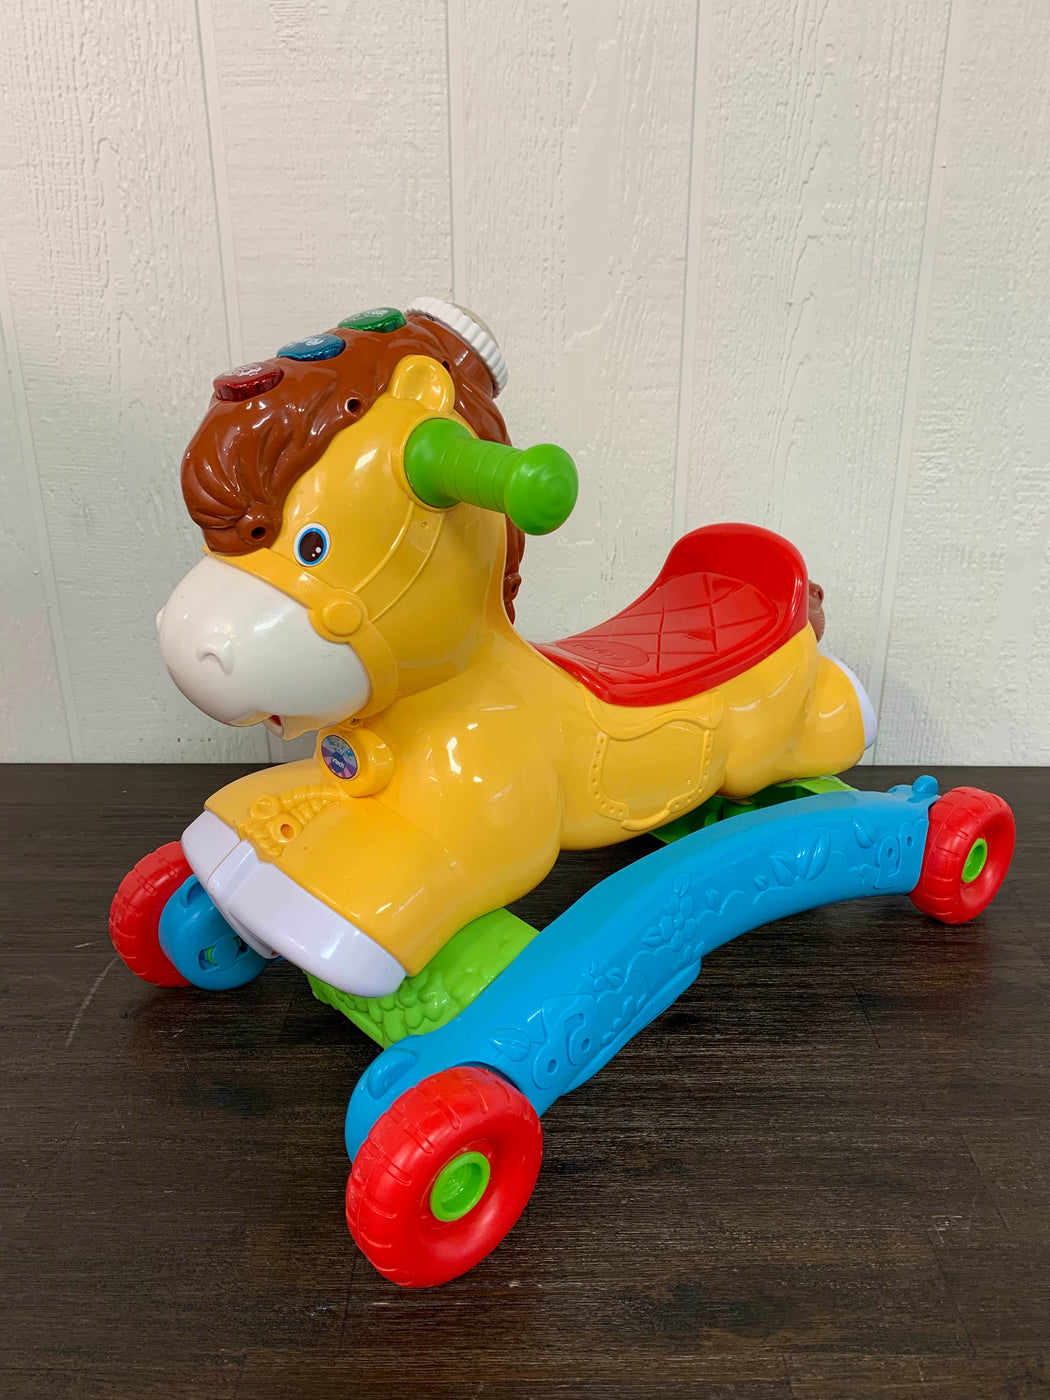 vtech rock and ride horse